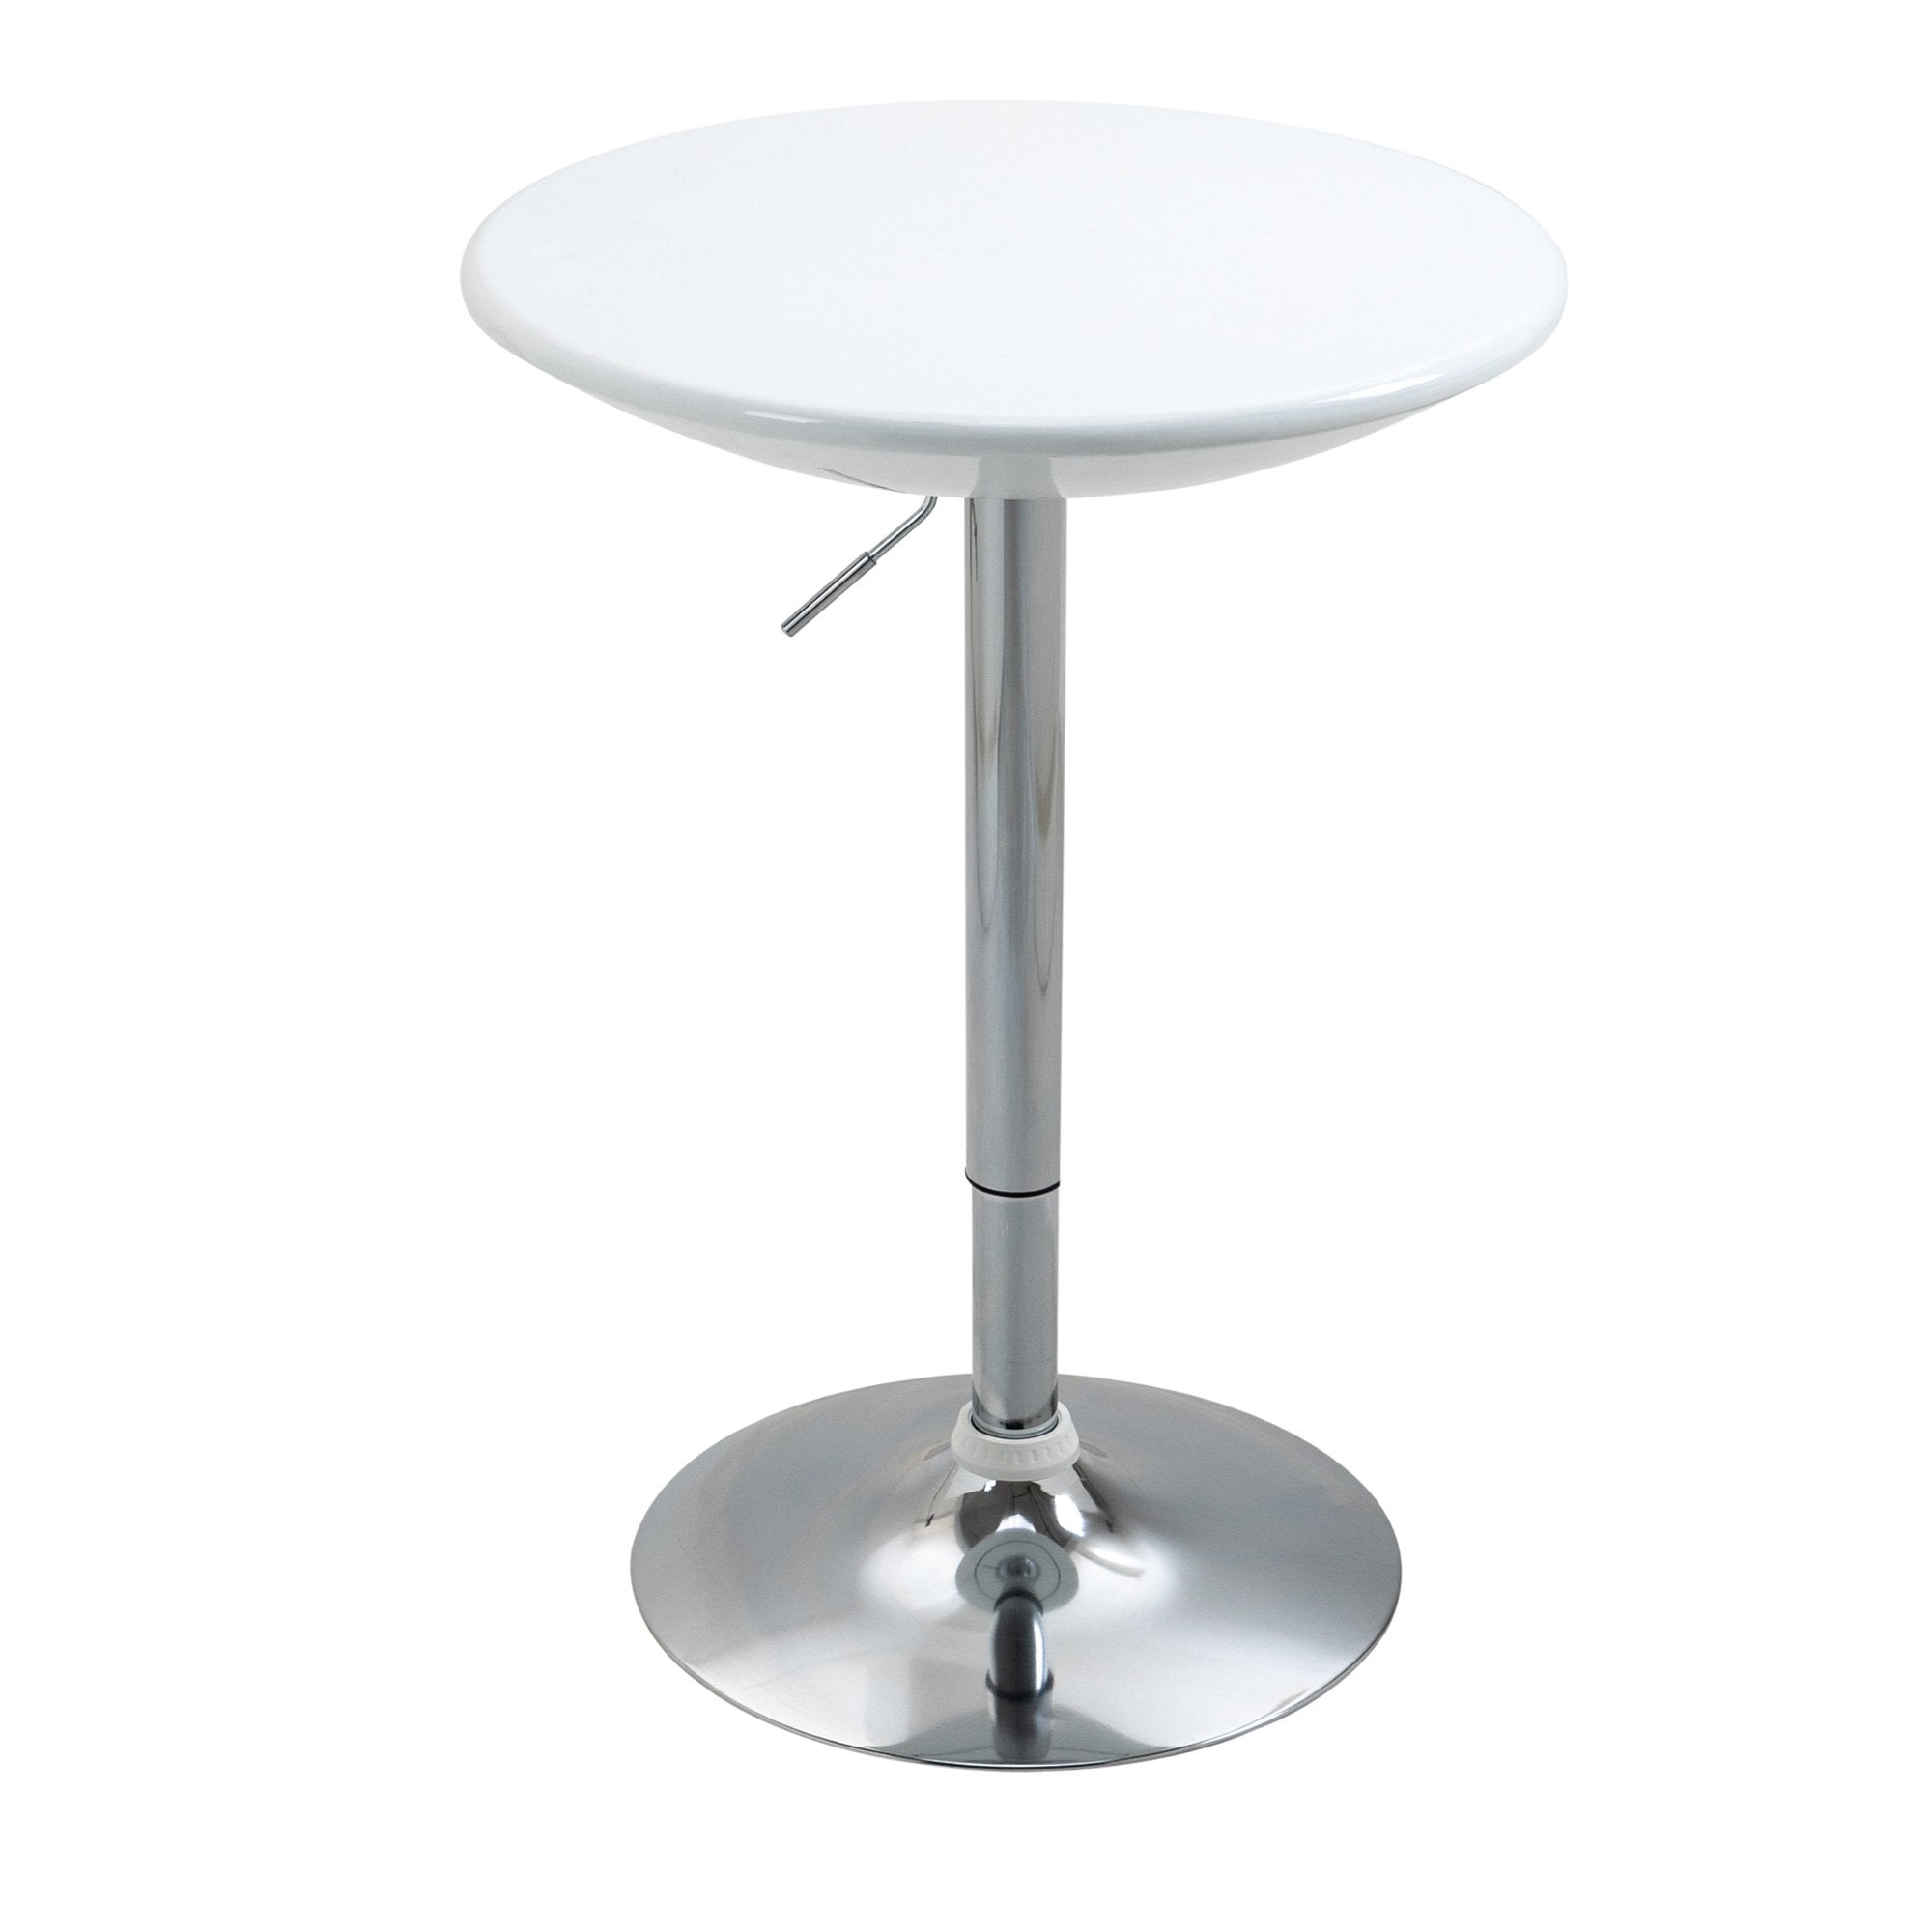 Modern Round Bar Table Adjustable Height Home Pub Bistro Desk Swivel Painted Top with Silver Steel Leg and Base - White 61 cm Indoor Counter - Home Li